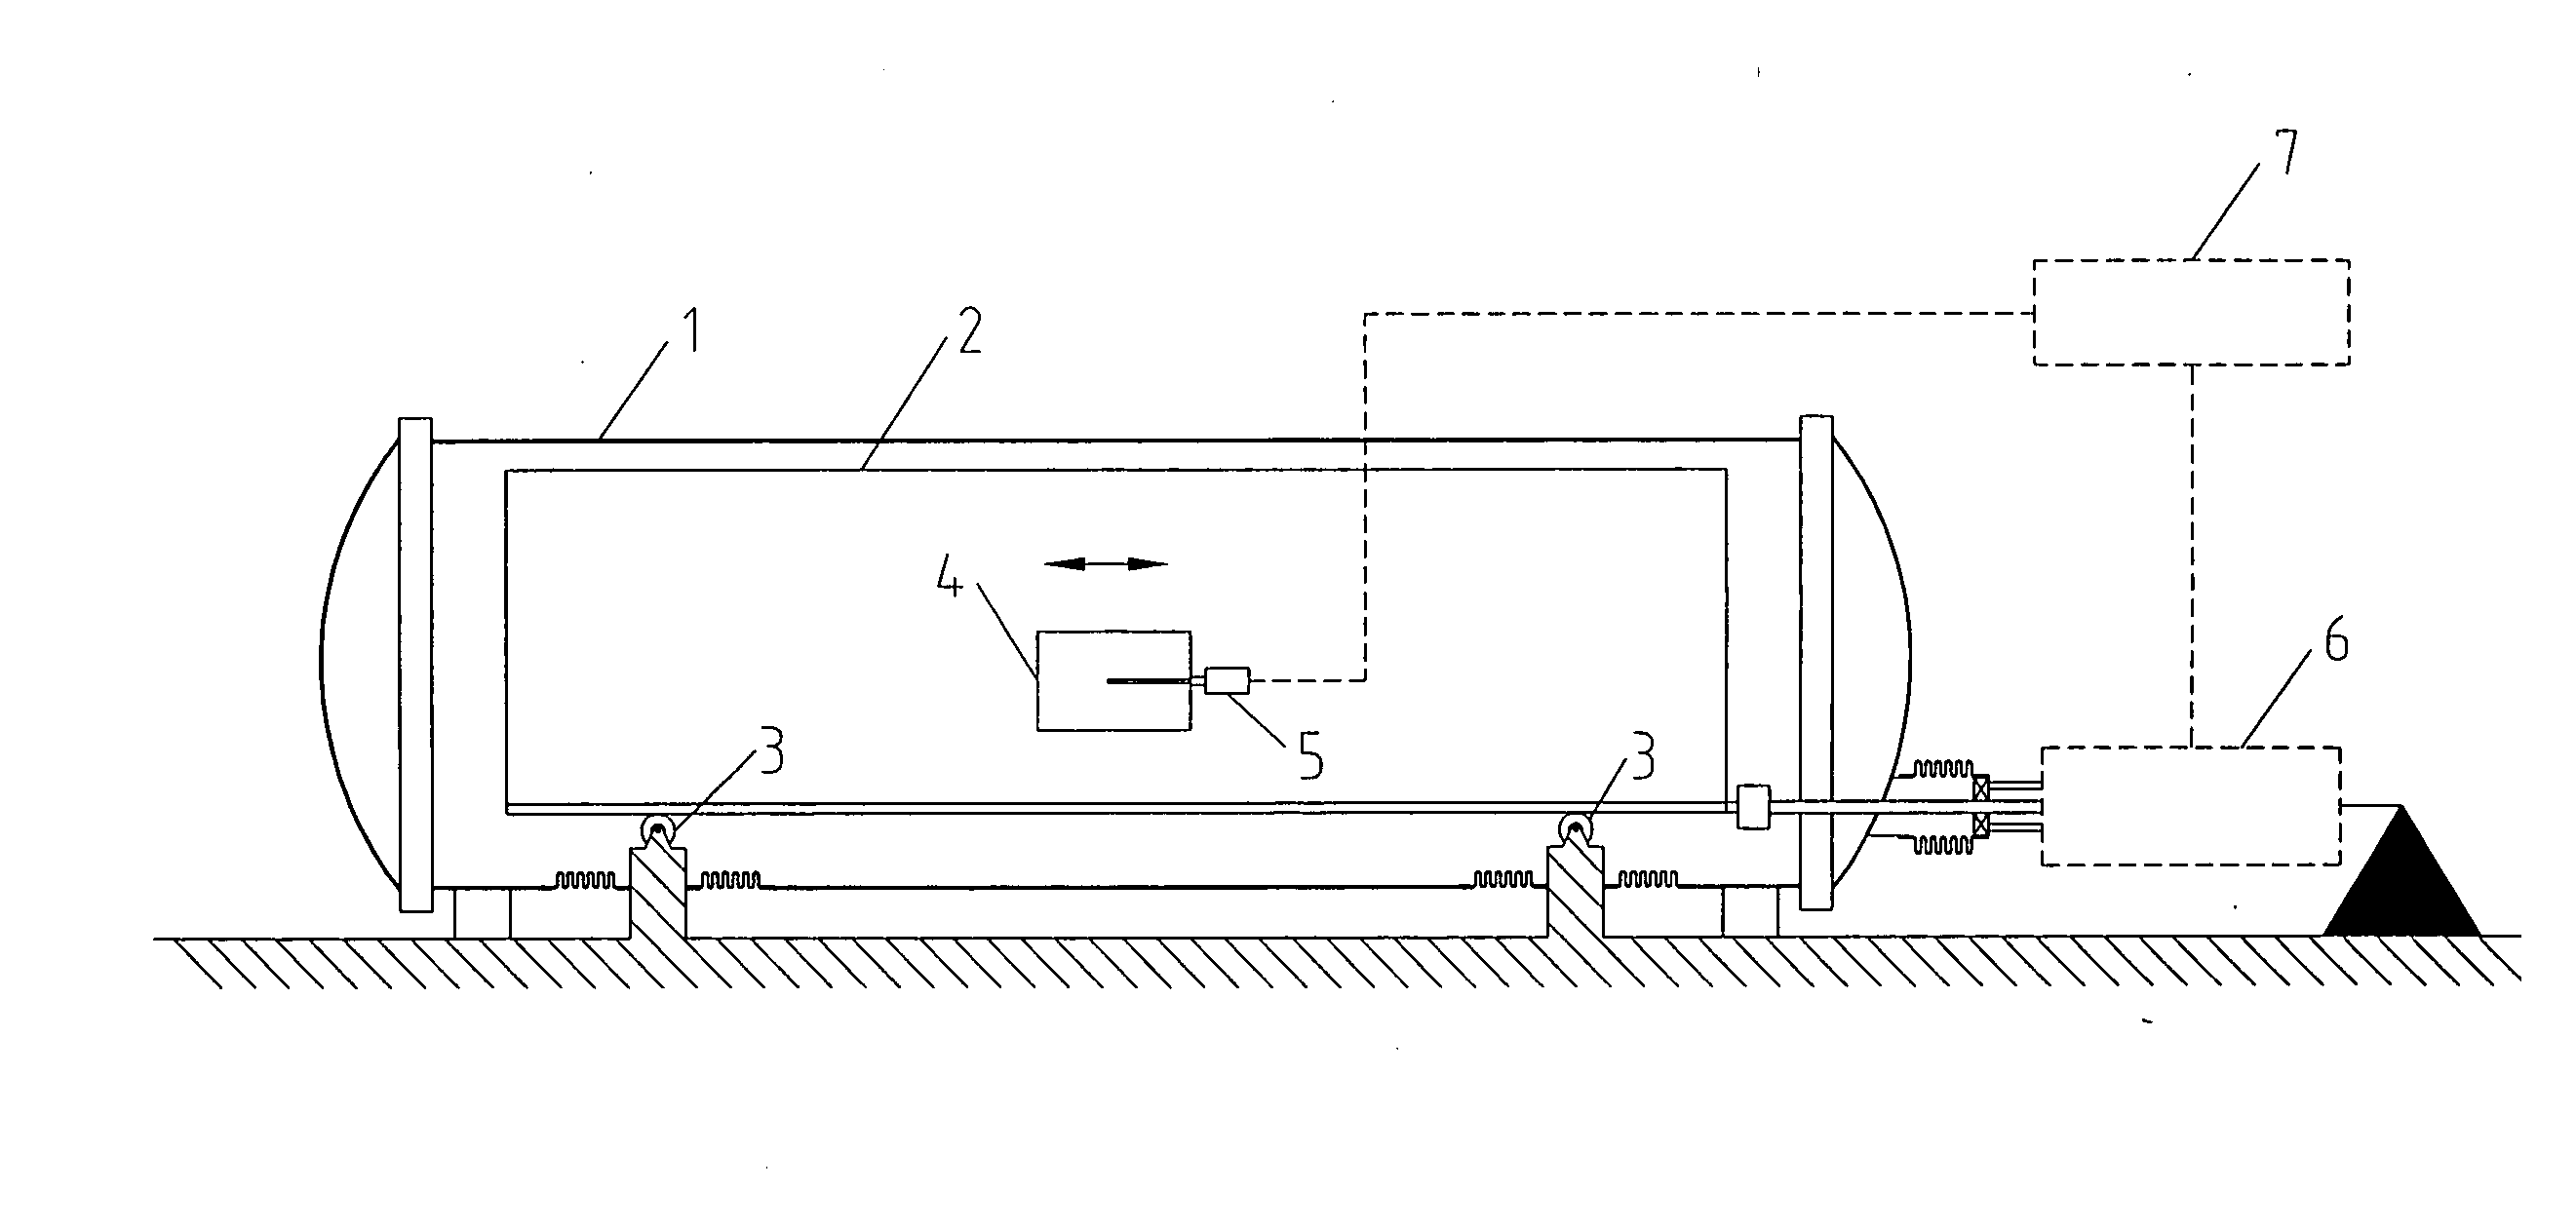 Method for heating or cooling material in a container